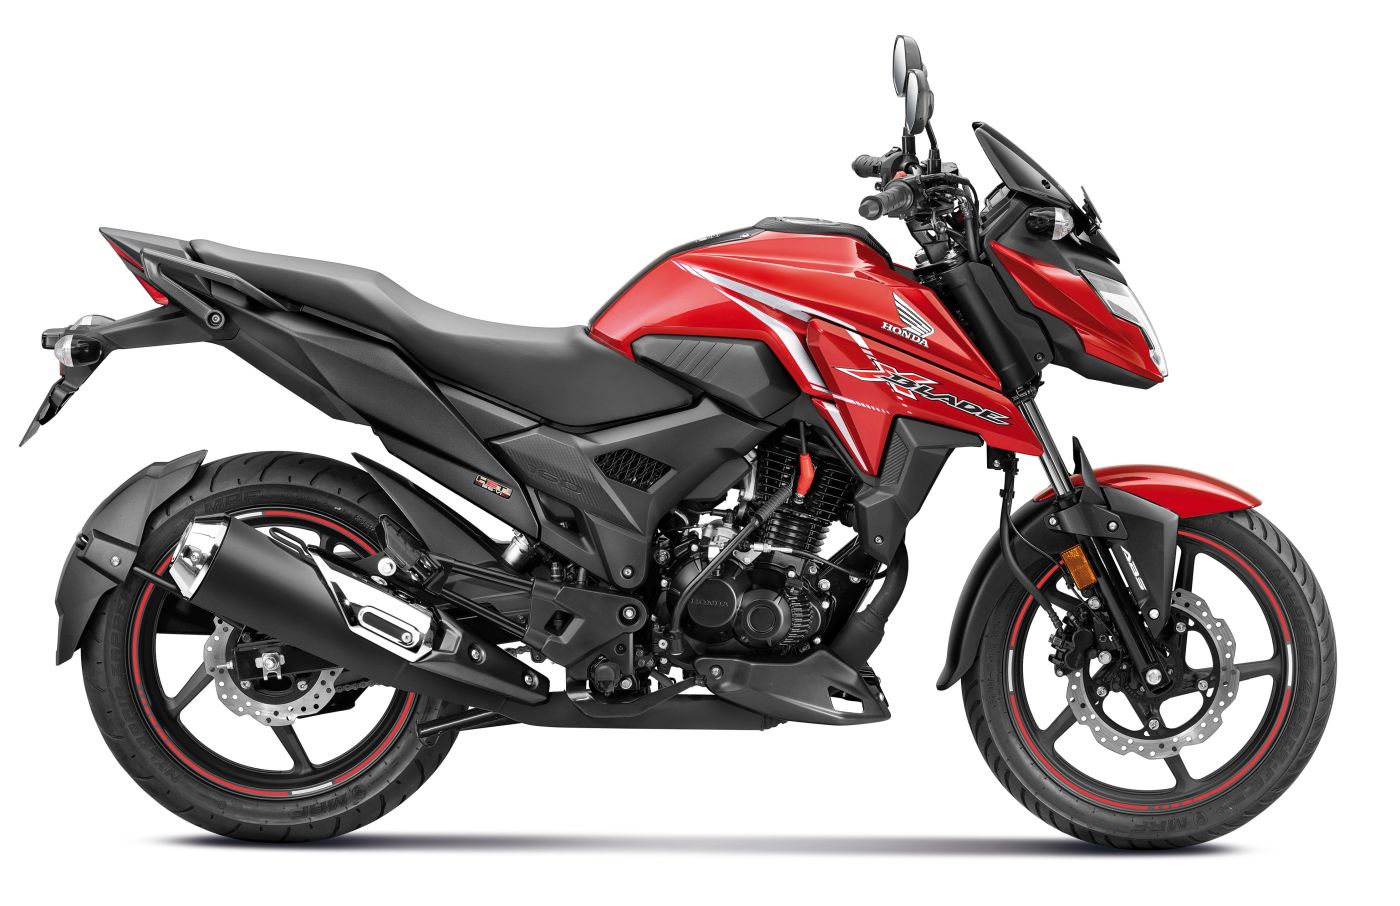 Honda X-Blade 160 BSVI launched, Price Rs. 1.05 Lakh